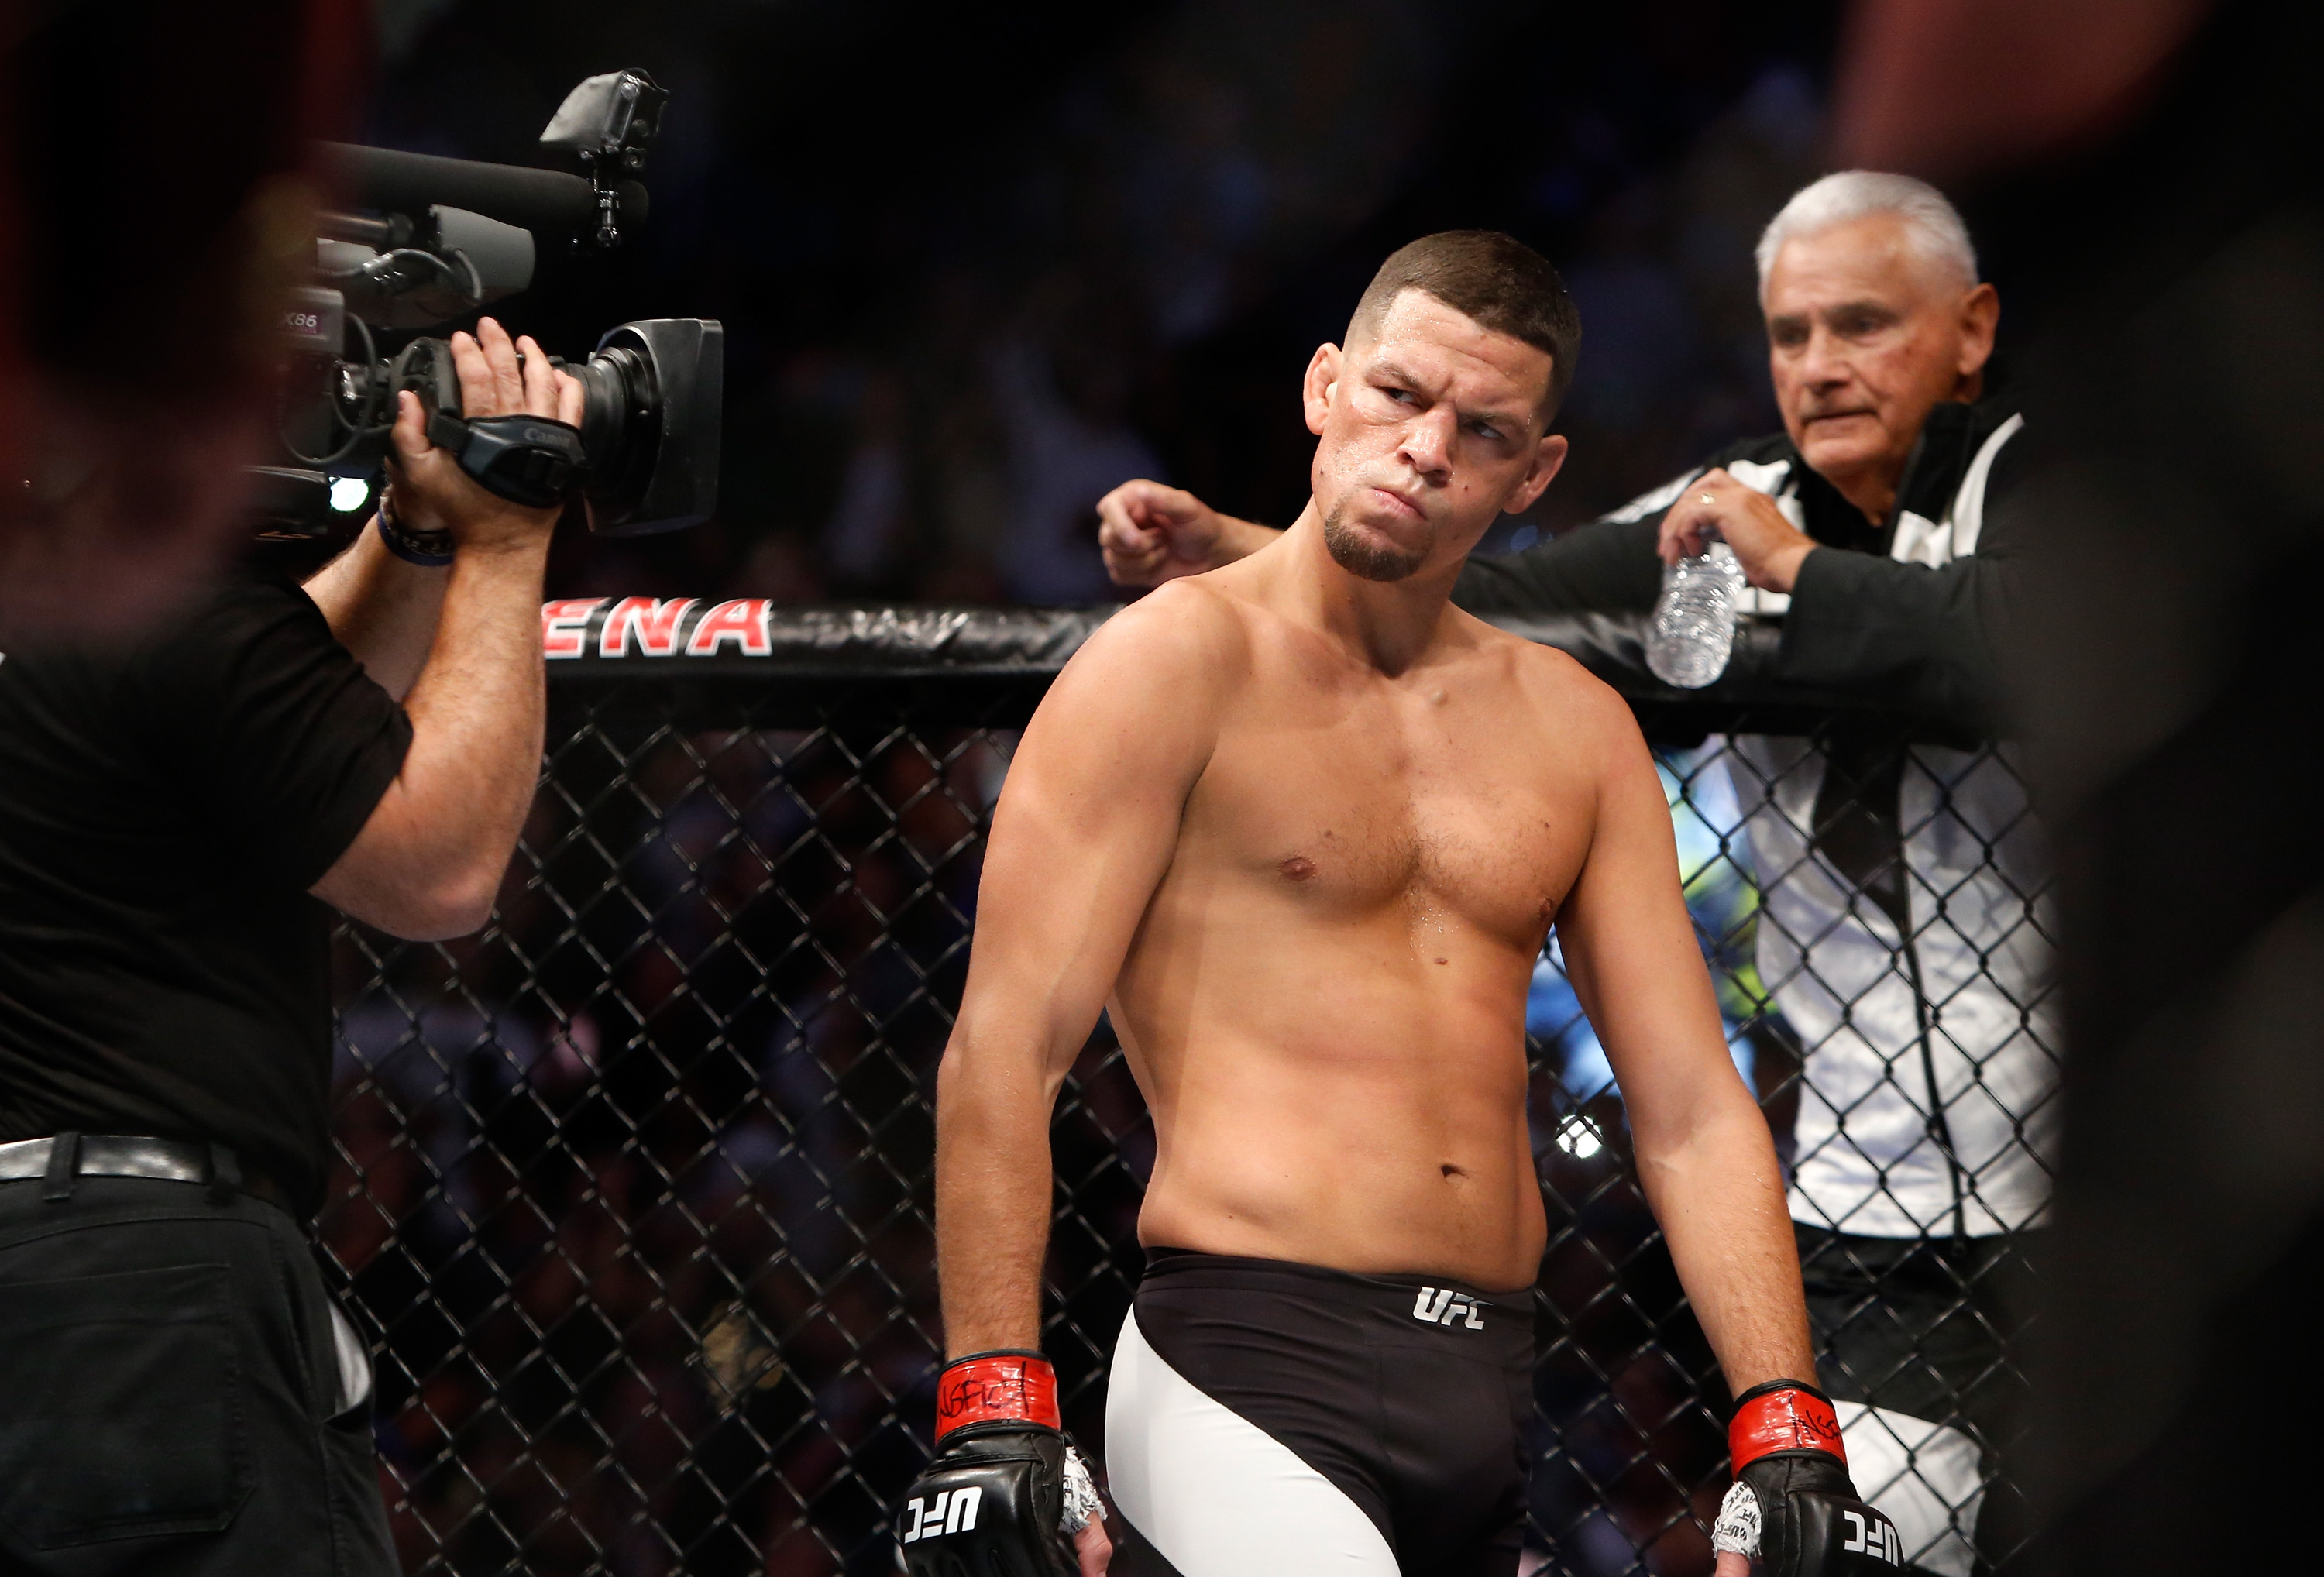 UFC 241 Nate Diaz vs Anthony Pettis: Nate Diaz to Lose His First Match Back in UFC ...